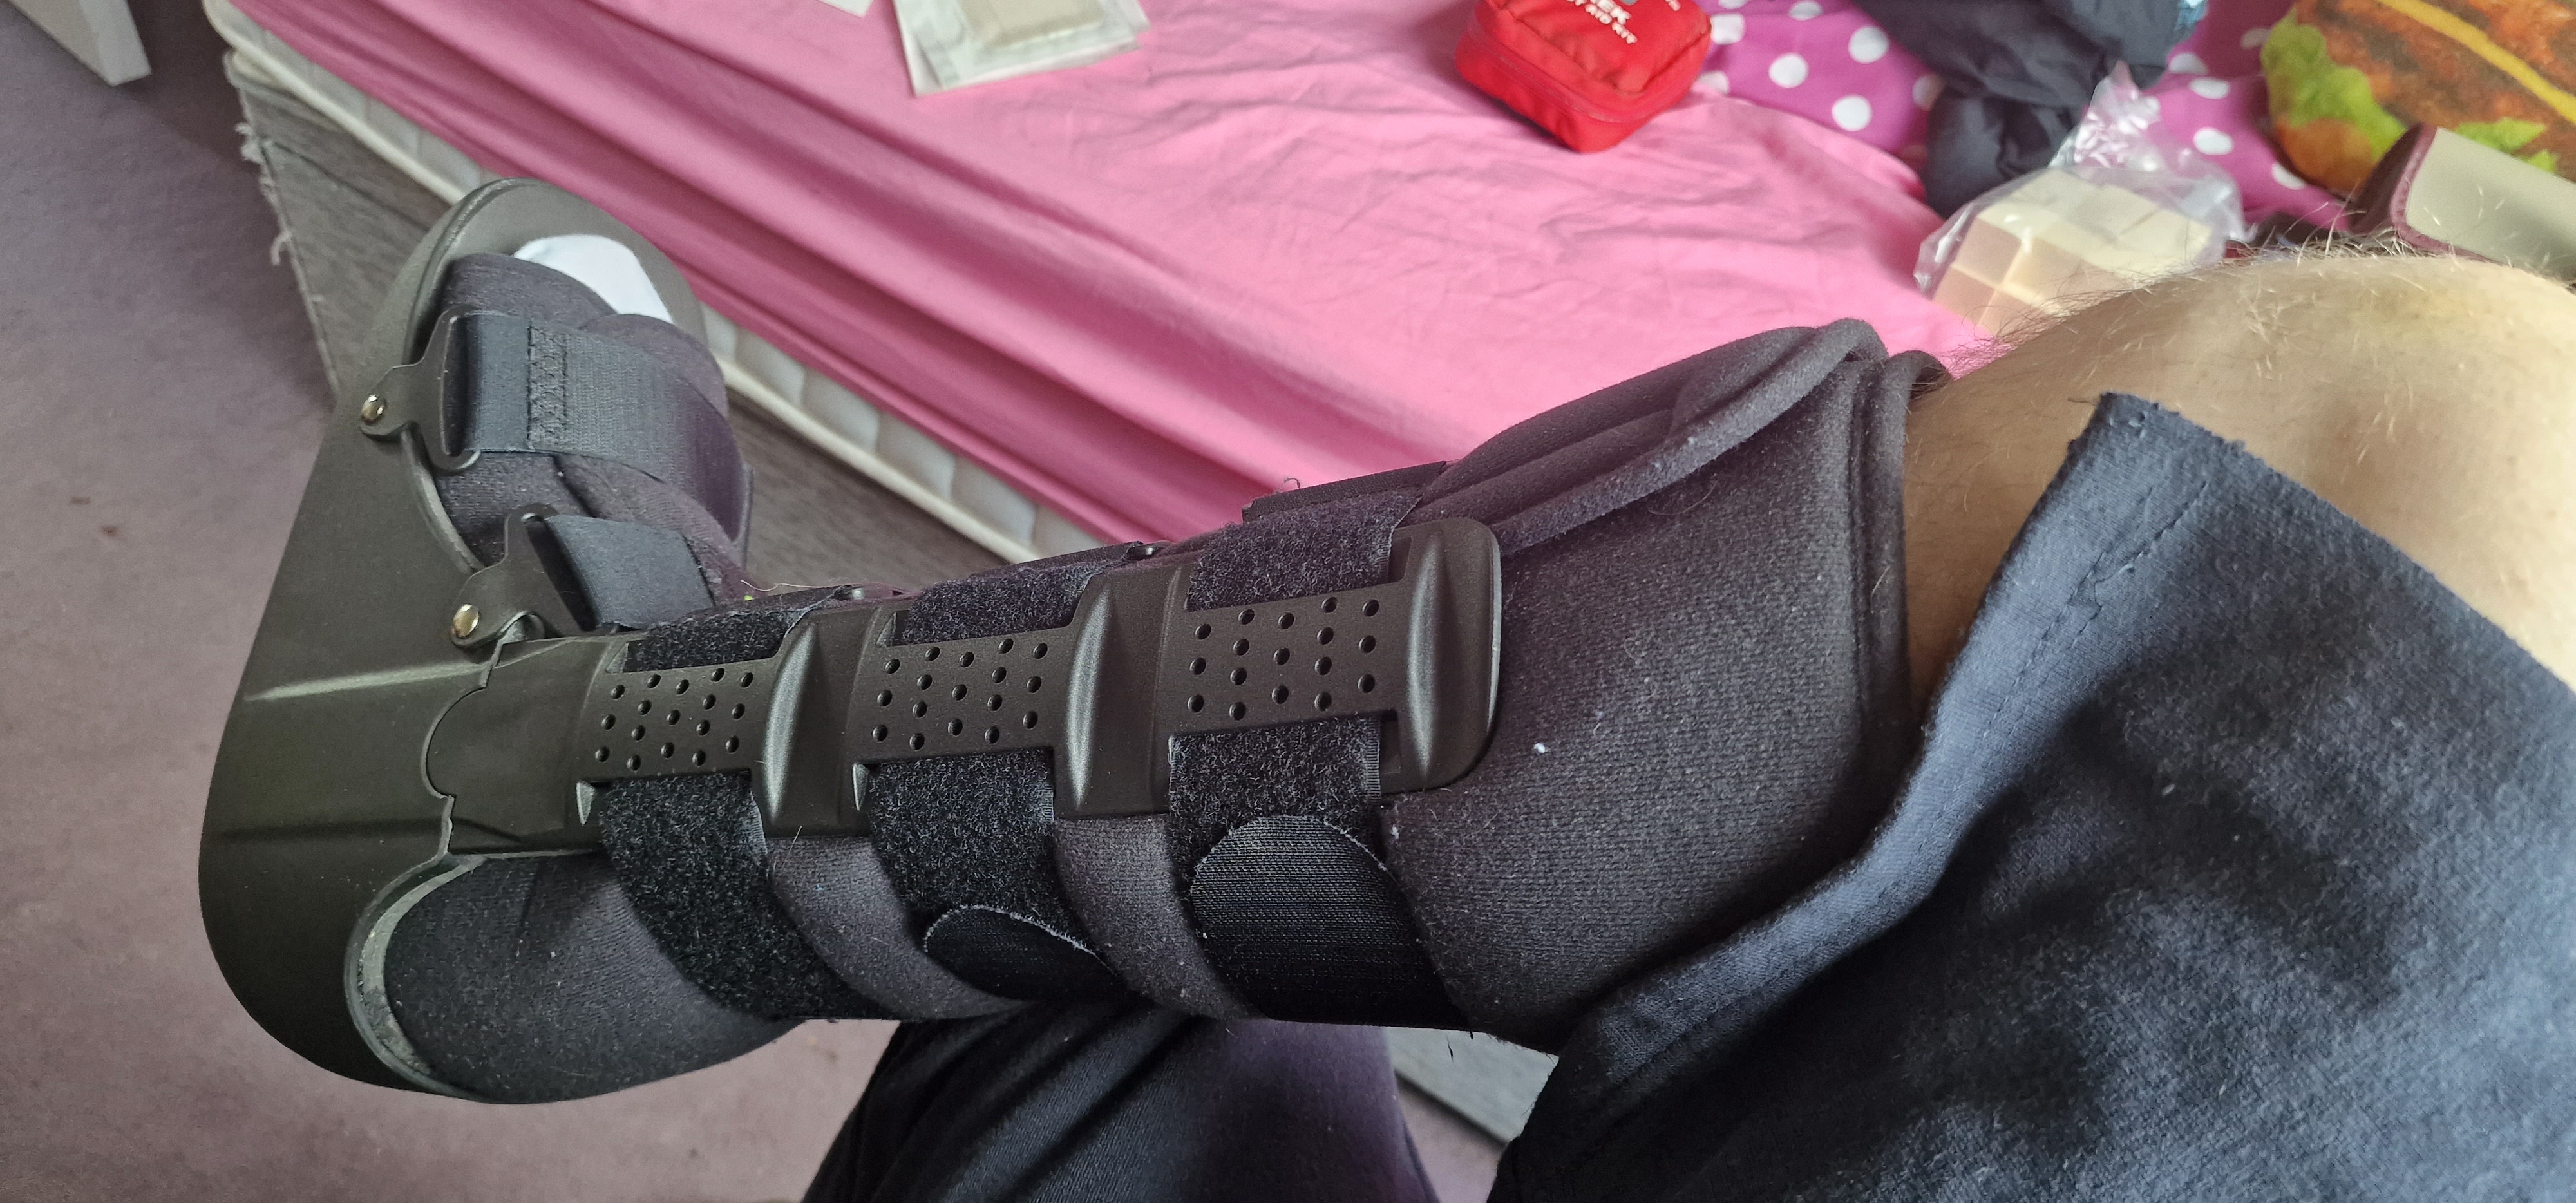 A large black boot on a right foot is shown. The boot has rigid plastic supports with a foam lining and is held in place with large Velcro straps